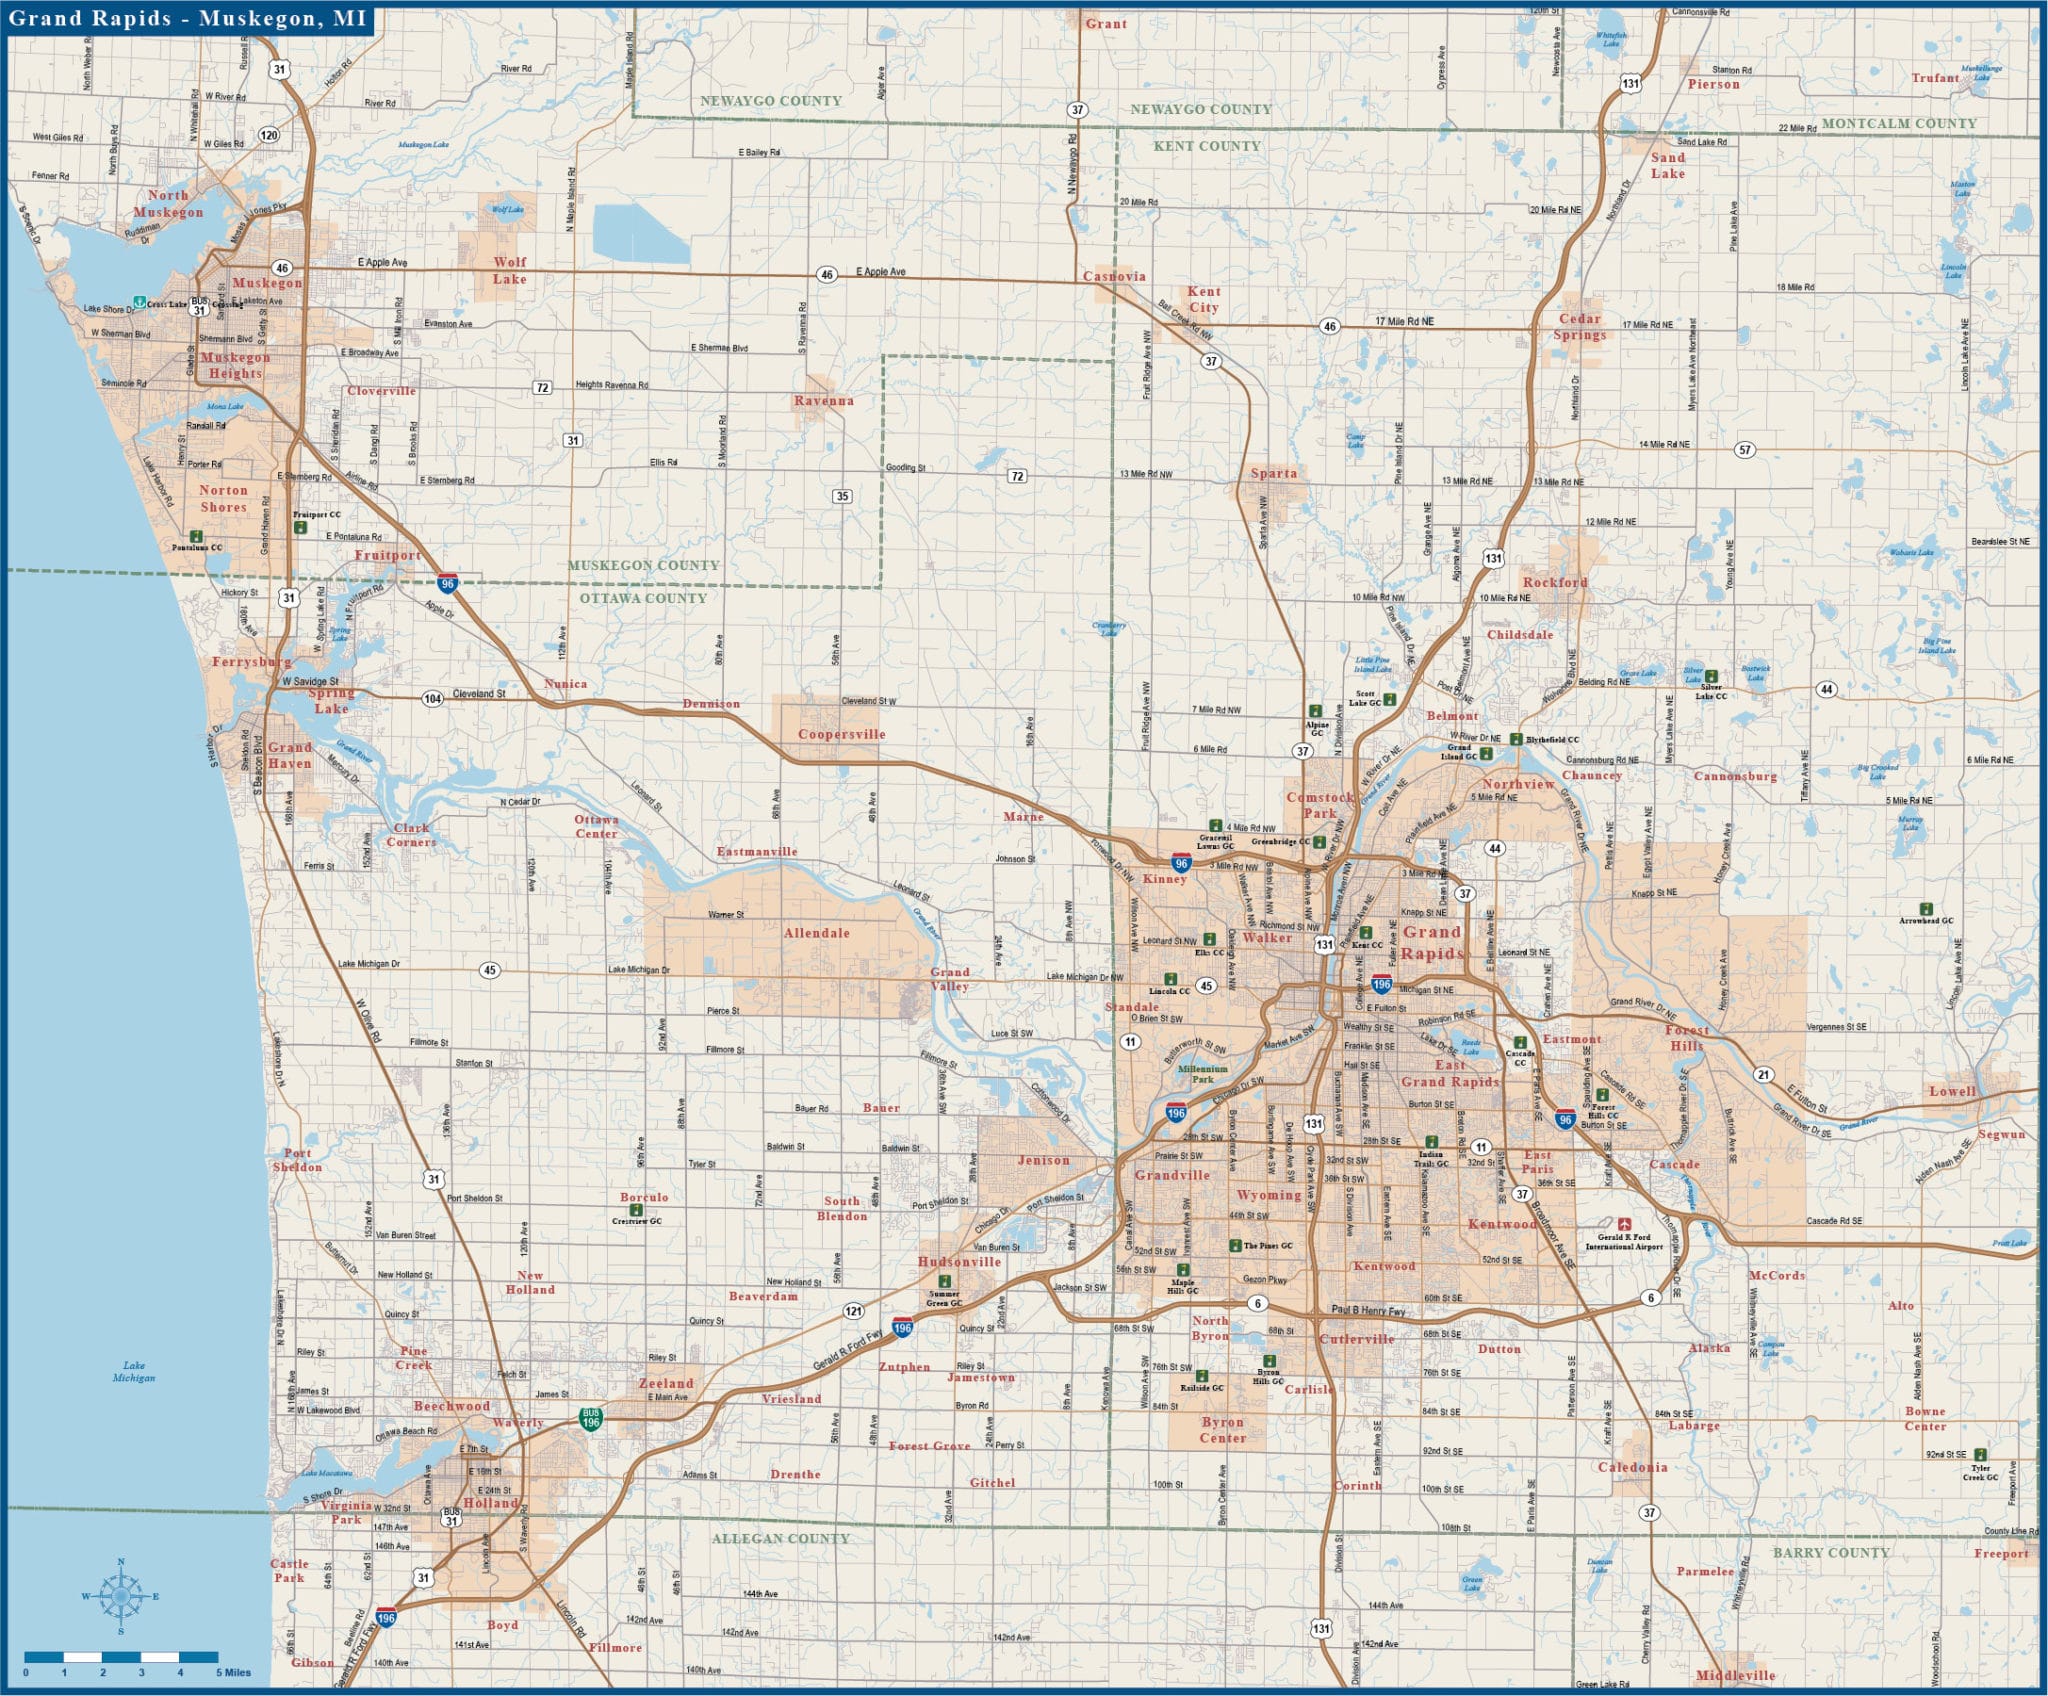 Grand Rapids To Muskegon Metro With Local Roads Map1 